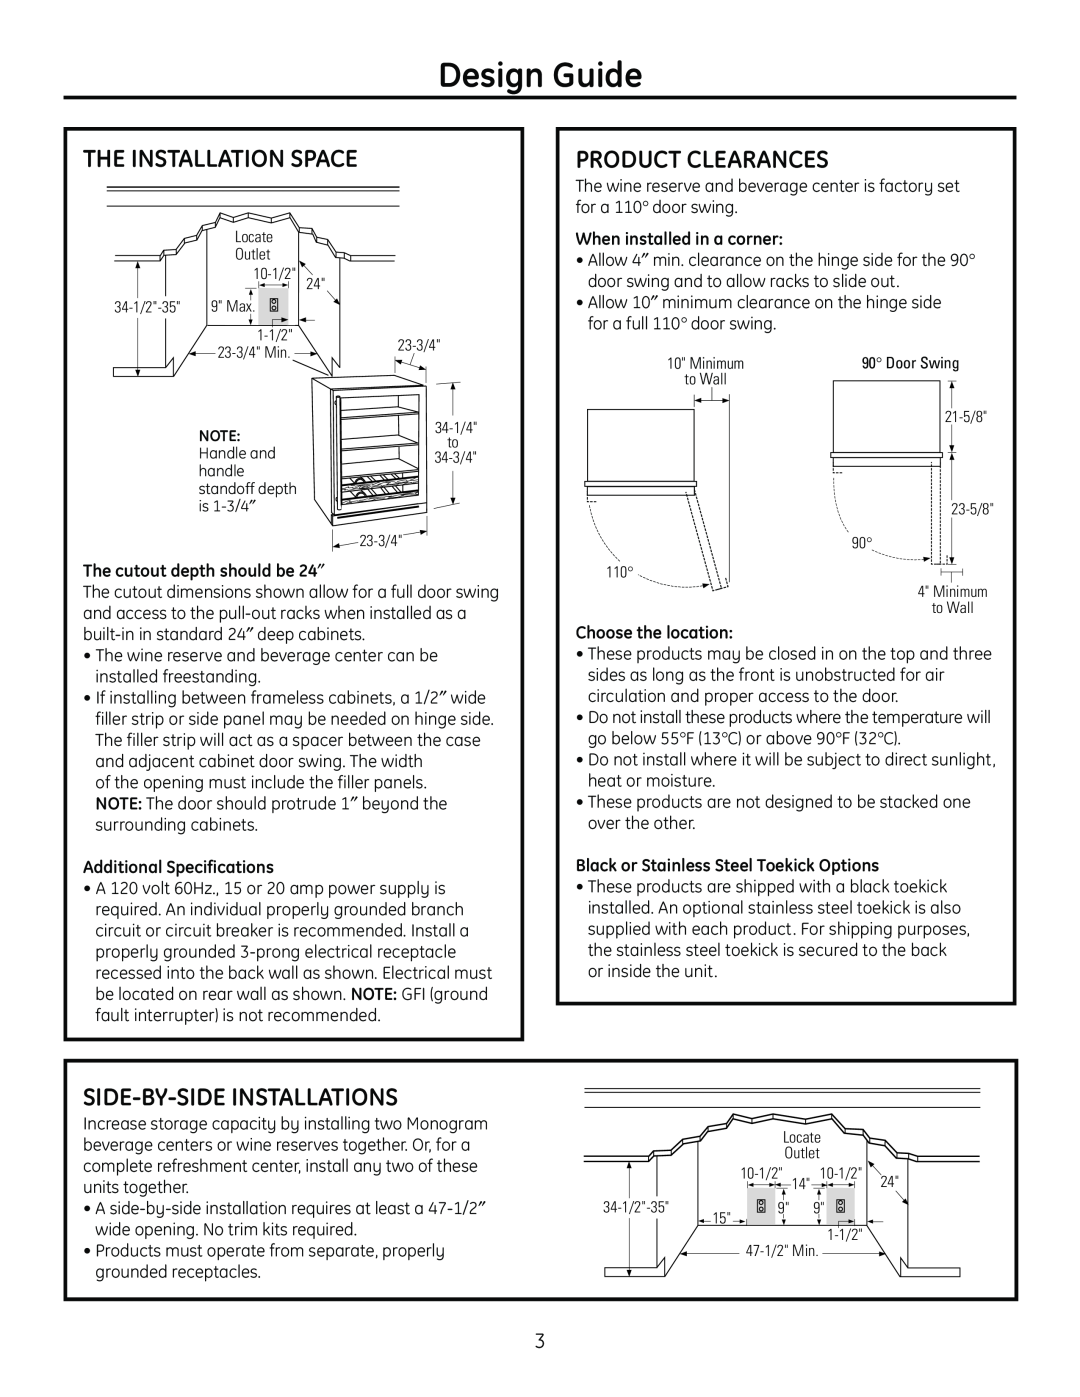 GE Monogram ZDBT240 Design Guide, The Installation Space, Product Clearances, Side-By-Sideinstallations 